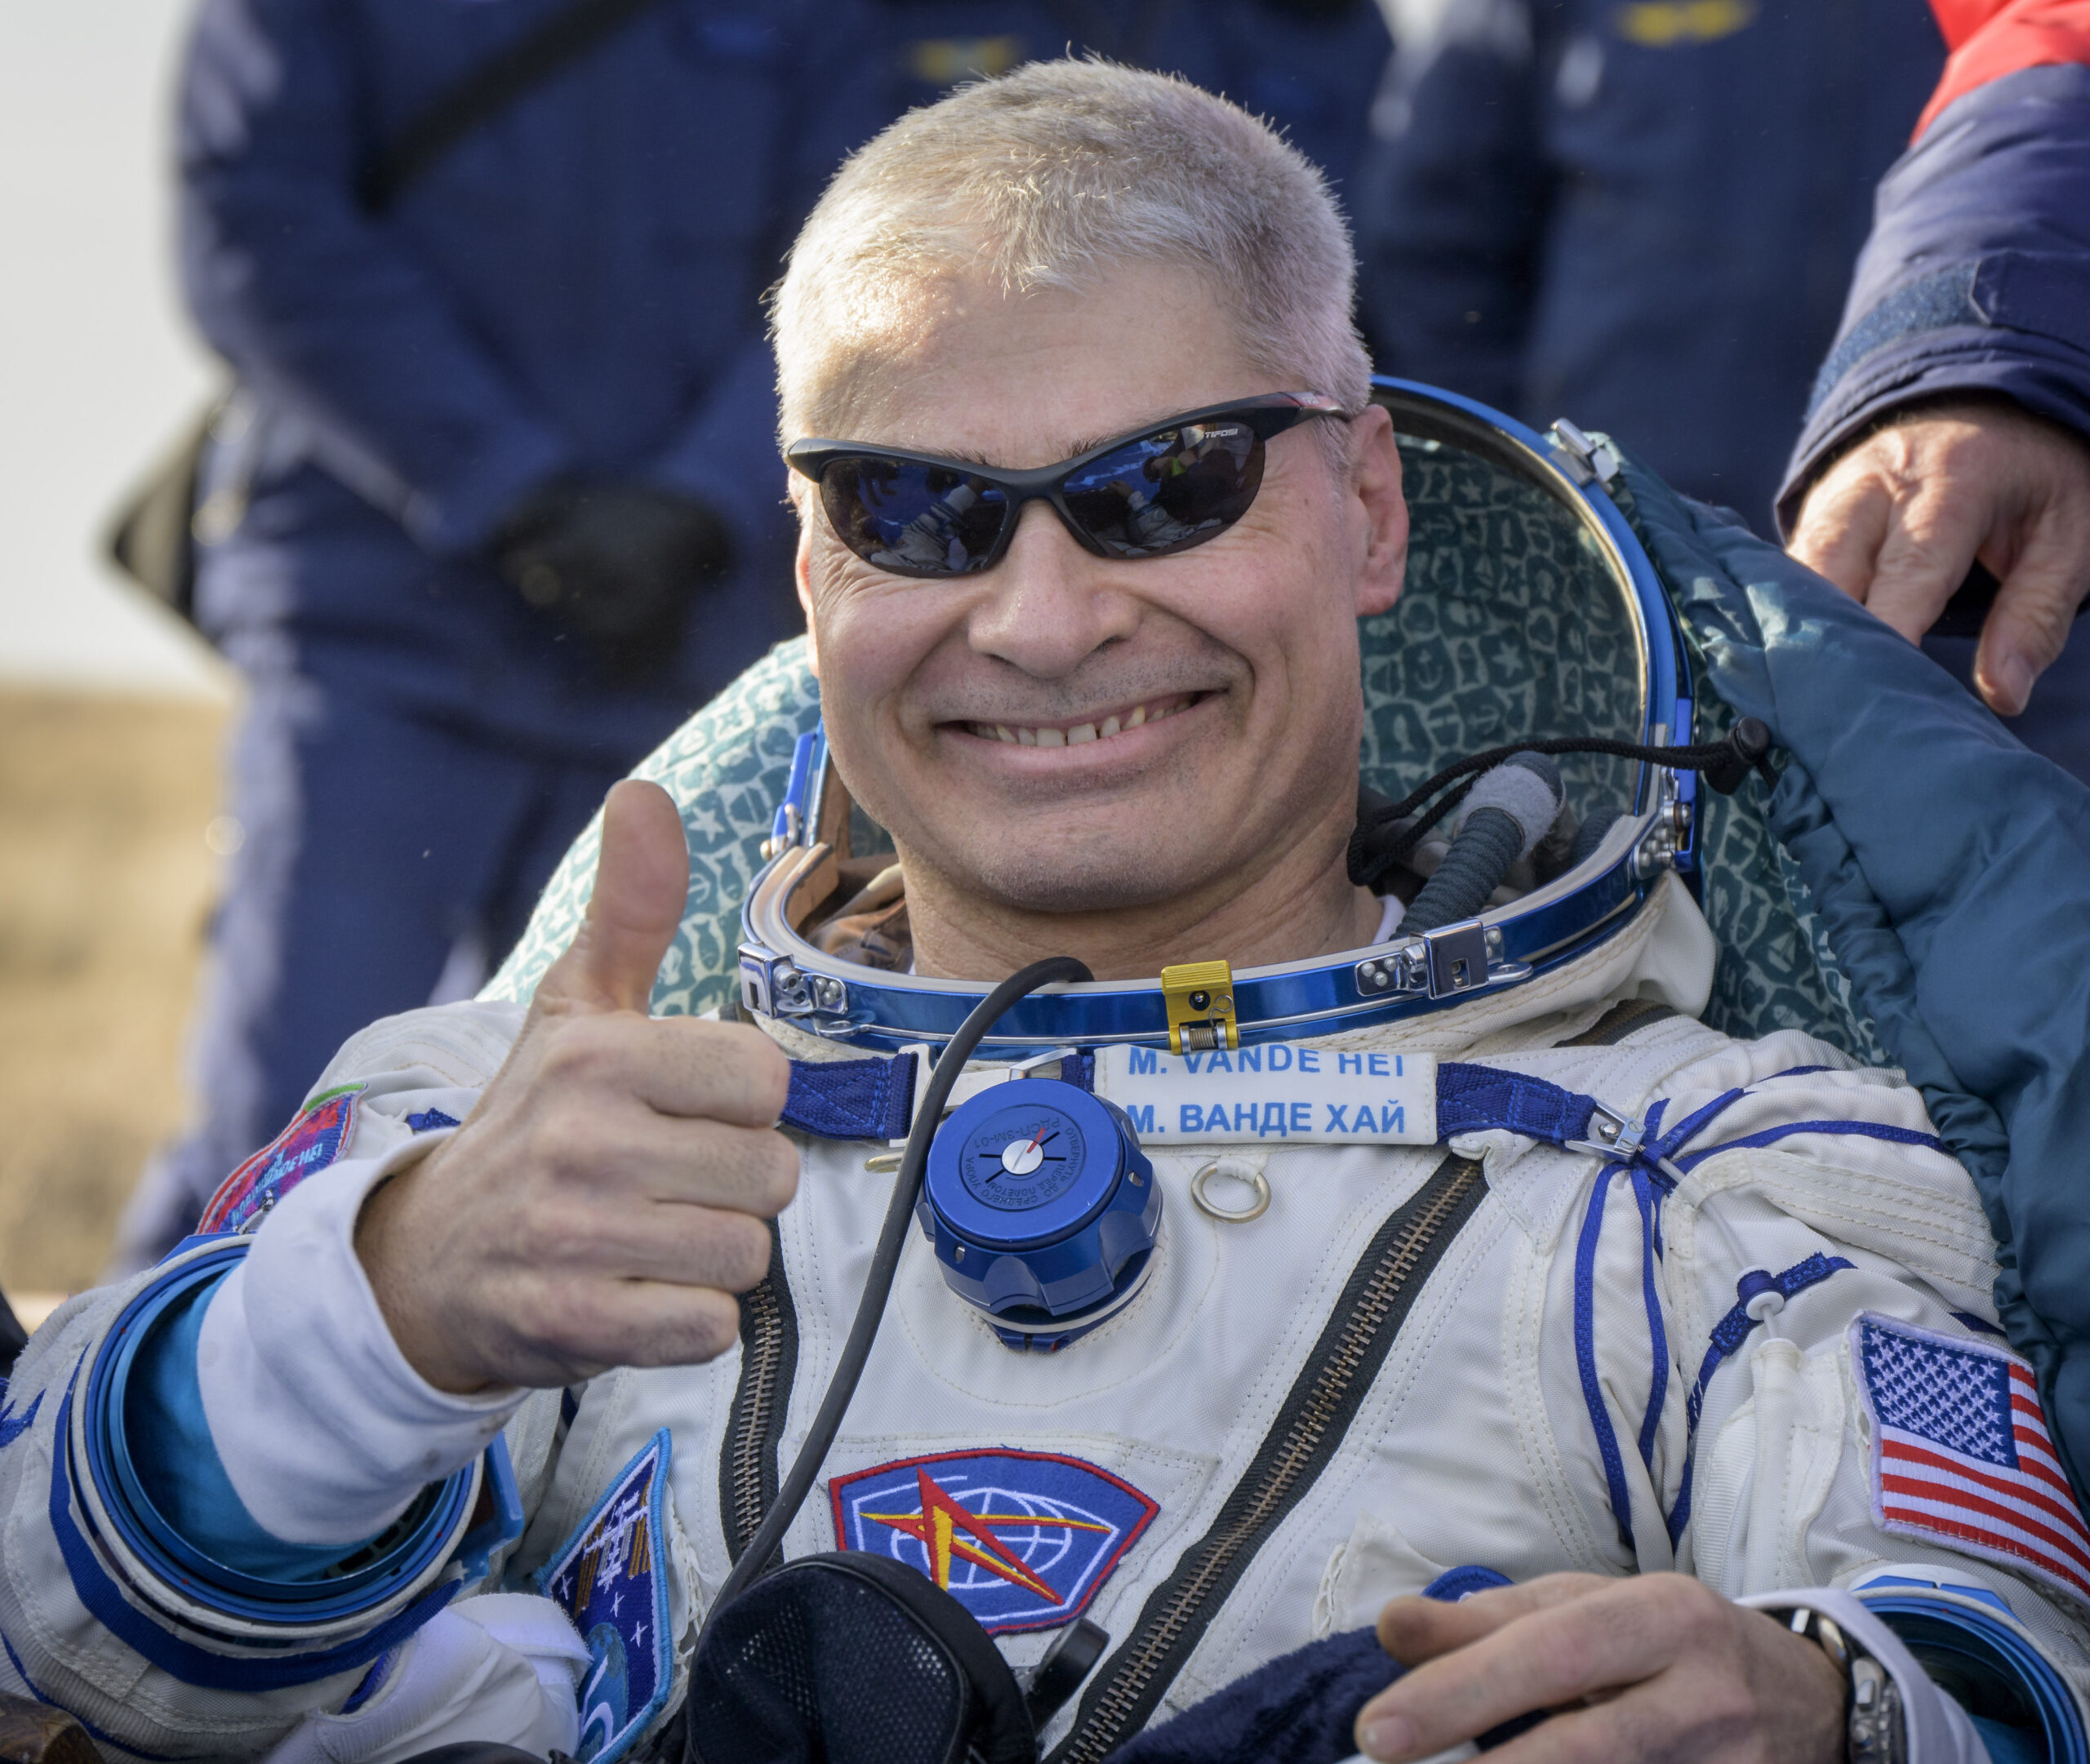 NASA astronaut Mark Vande Hei gives the thumbs up outside the Soyuz MS-19 spacecraft after he landed with Russian cosmonauts Anton Shkaplerov and Pyotr Dubrov in a remote area near the town of Zhezkazgan, Kazakhstan on Wednesday, March 30, 2022. Vande Hei and Dubrov are returning to Earth after logging 355 days in space as members of Expeditions 64-66 aboard the International Space Station. (Bill Ingall/NASA via AP)